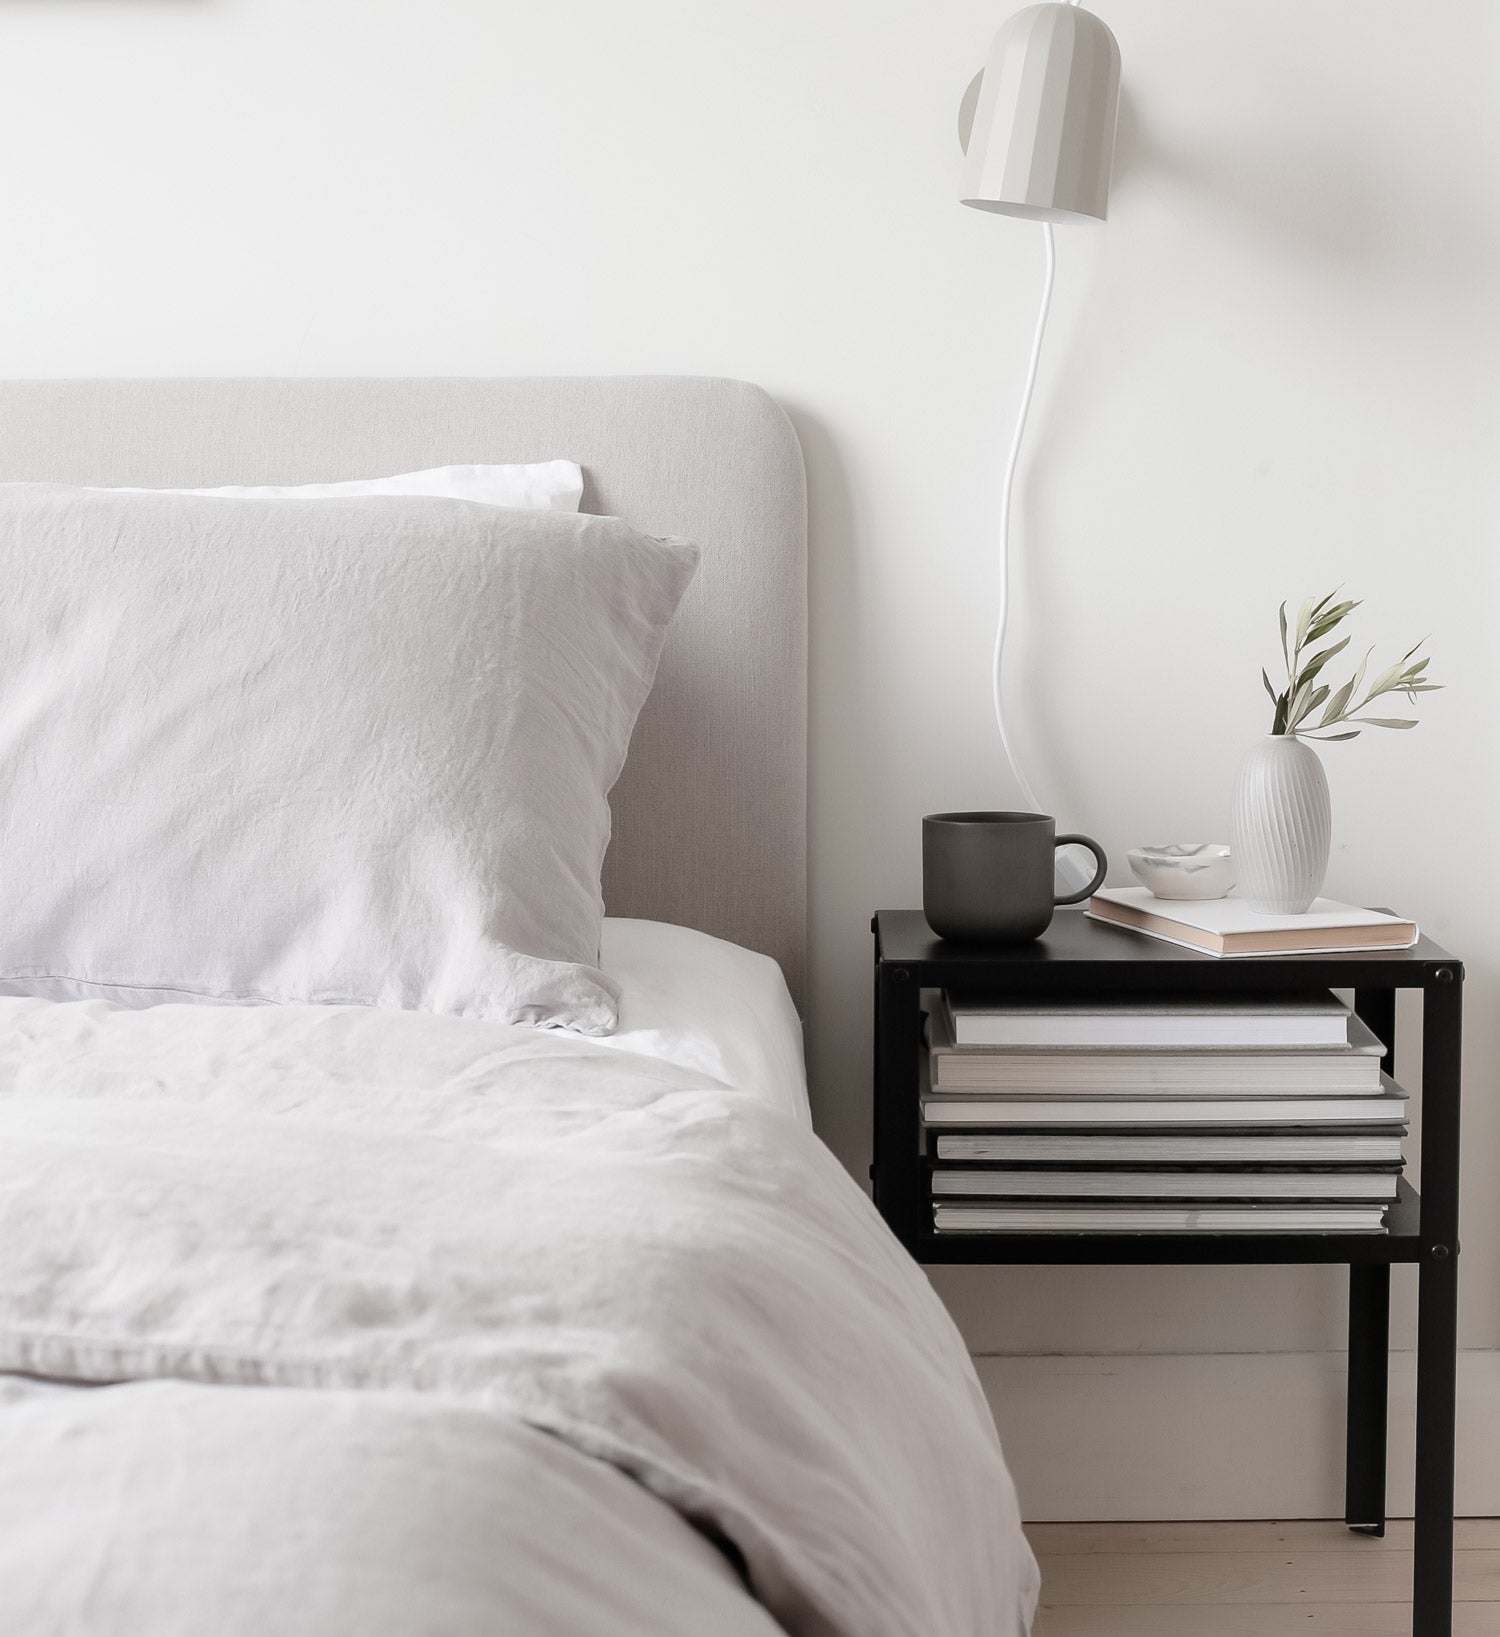 Linen Bedding in Grey on Bed | scooms